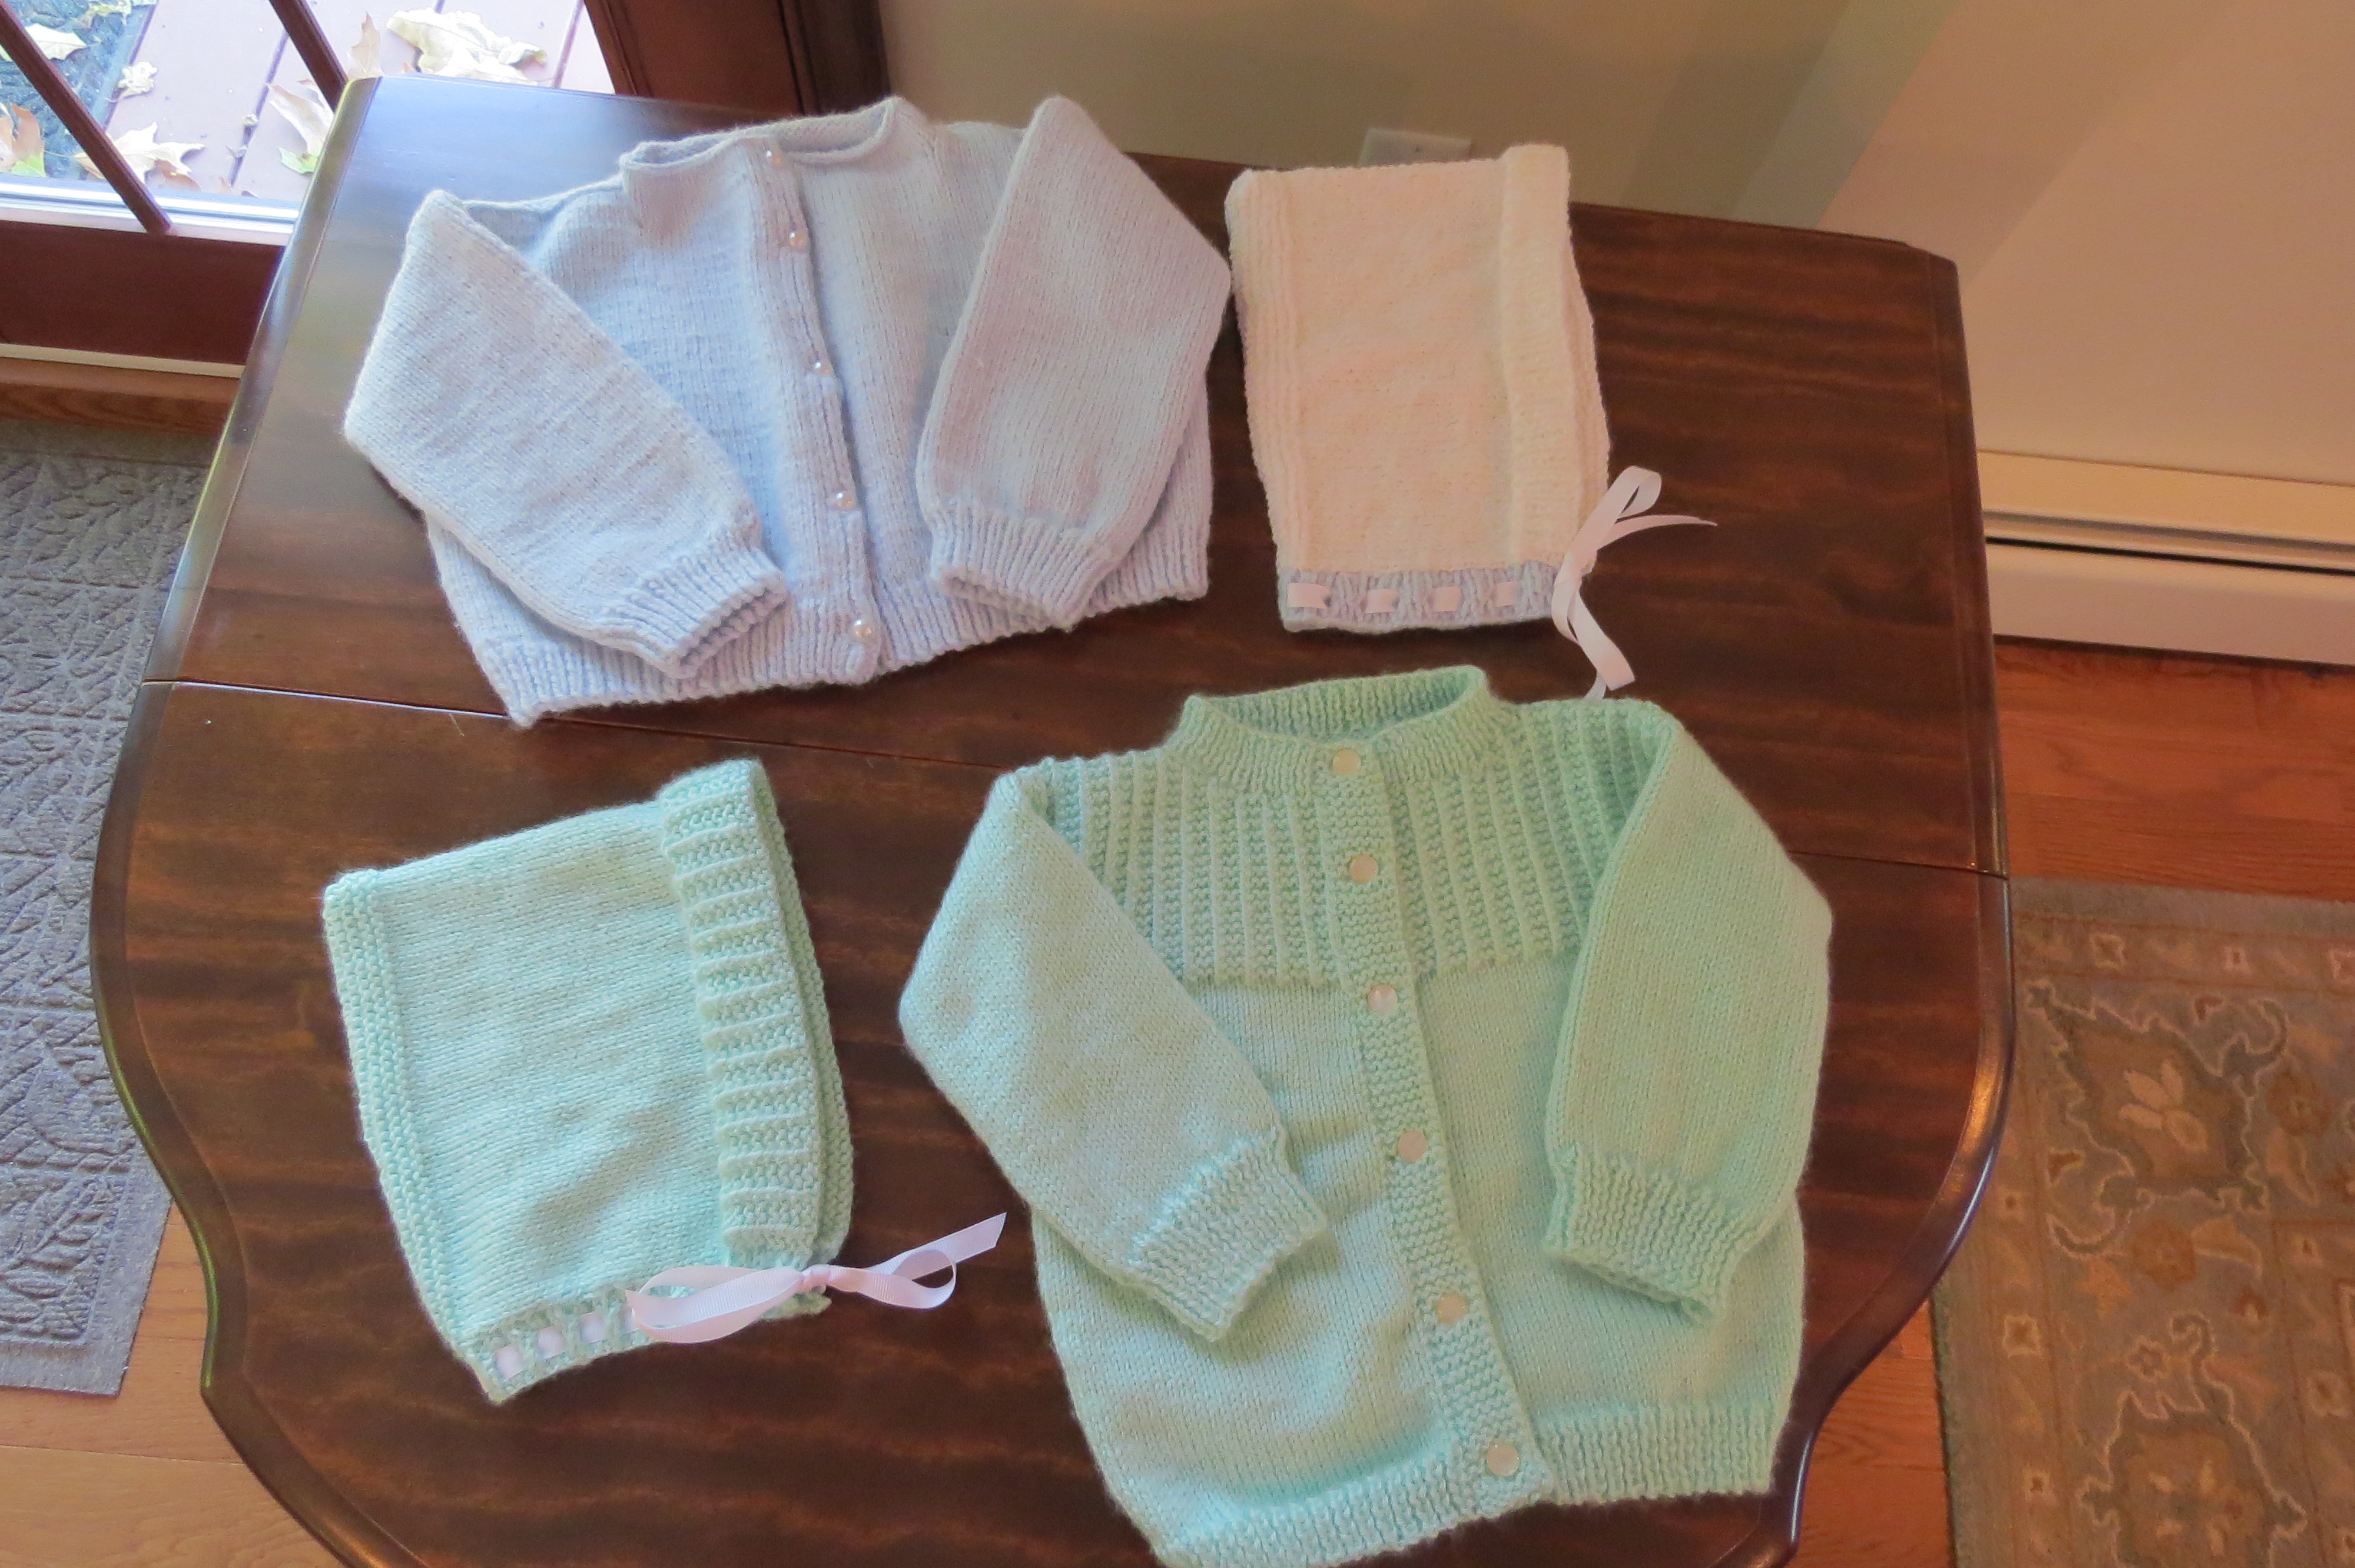 Knit items that were donated to Ann's Place in Danbury Connecticut. 